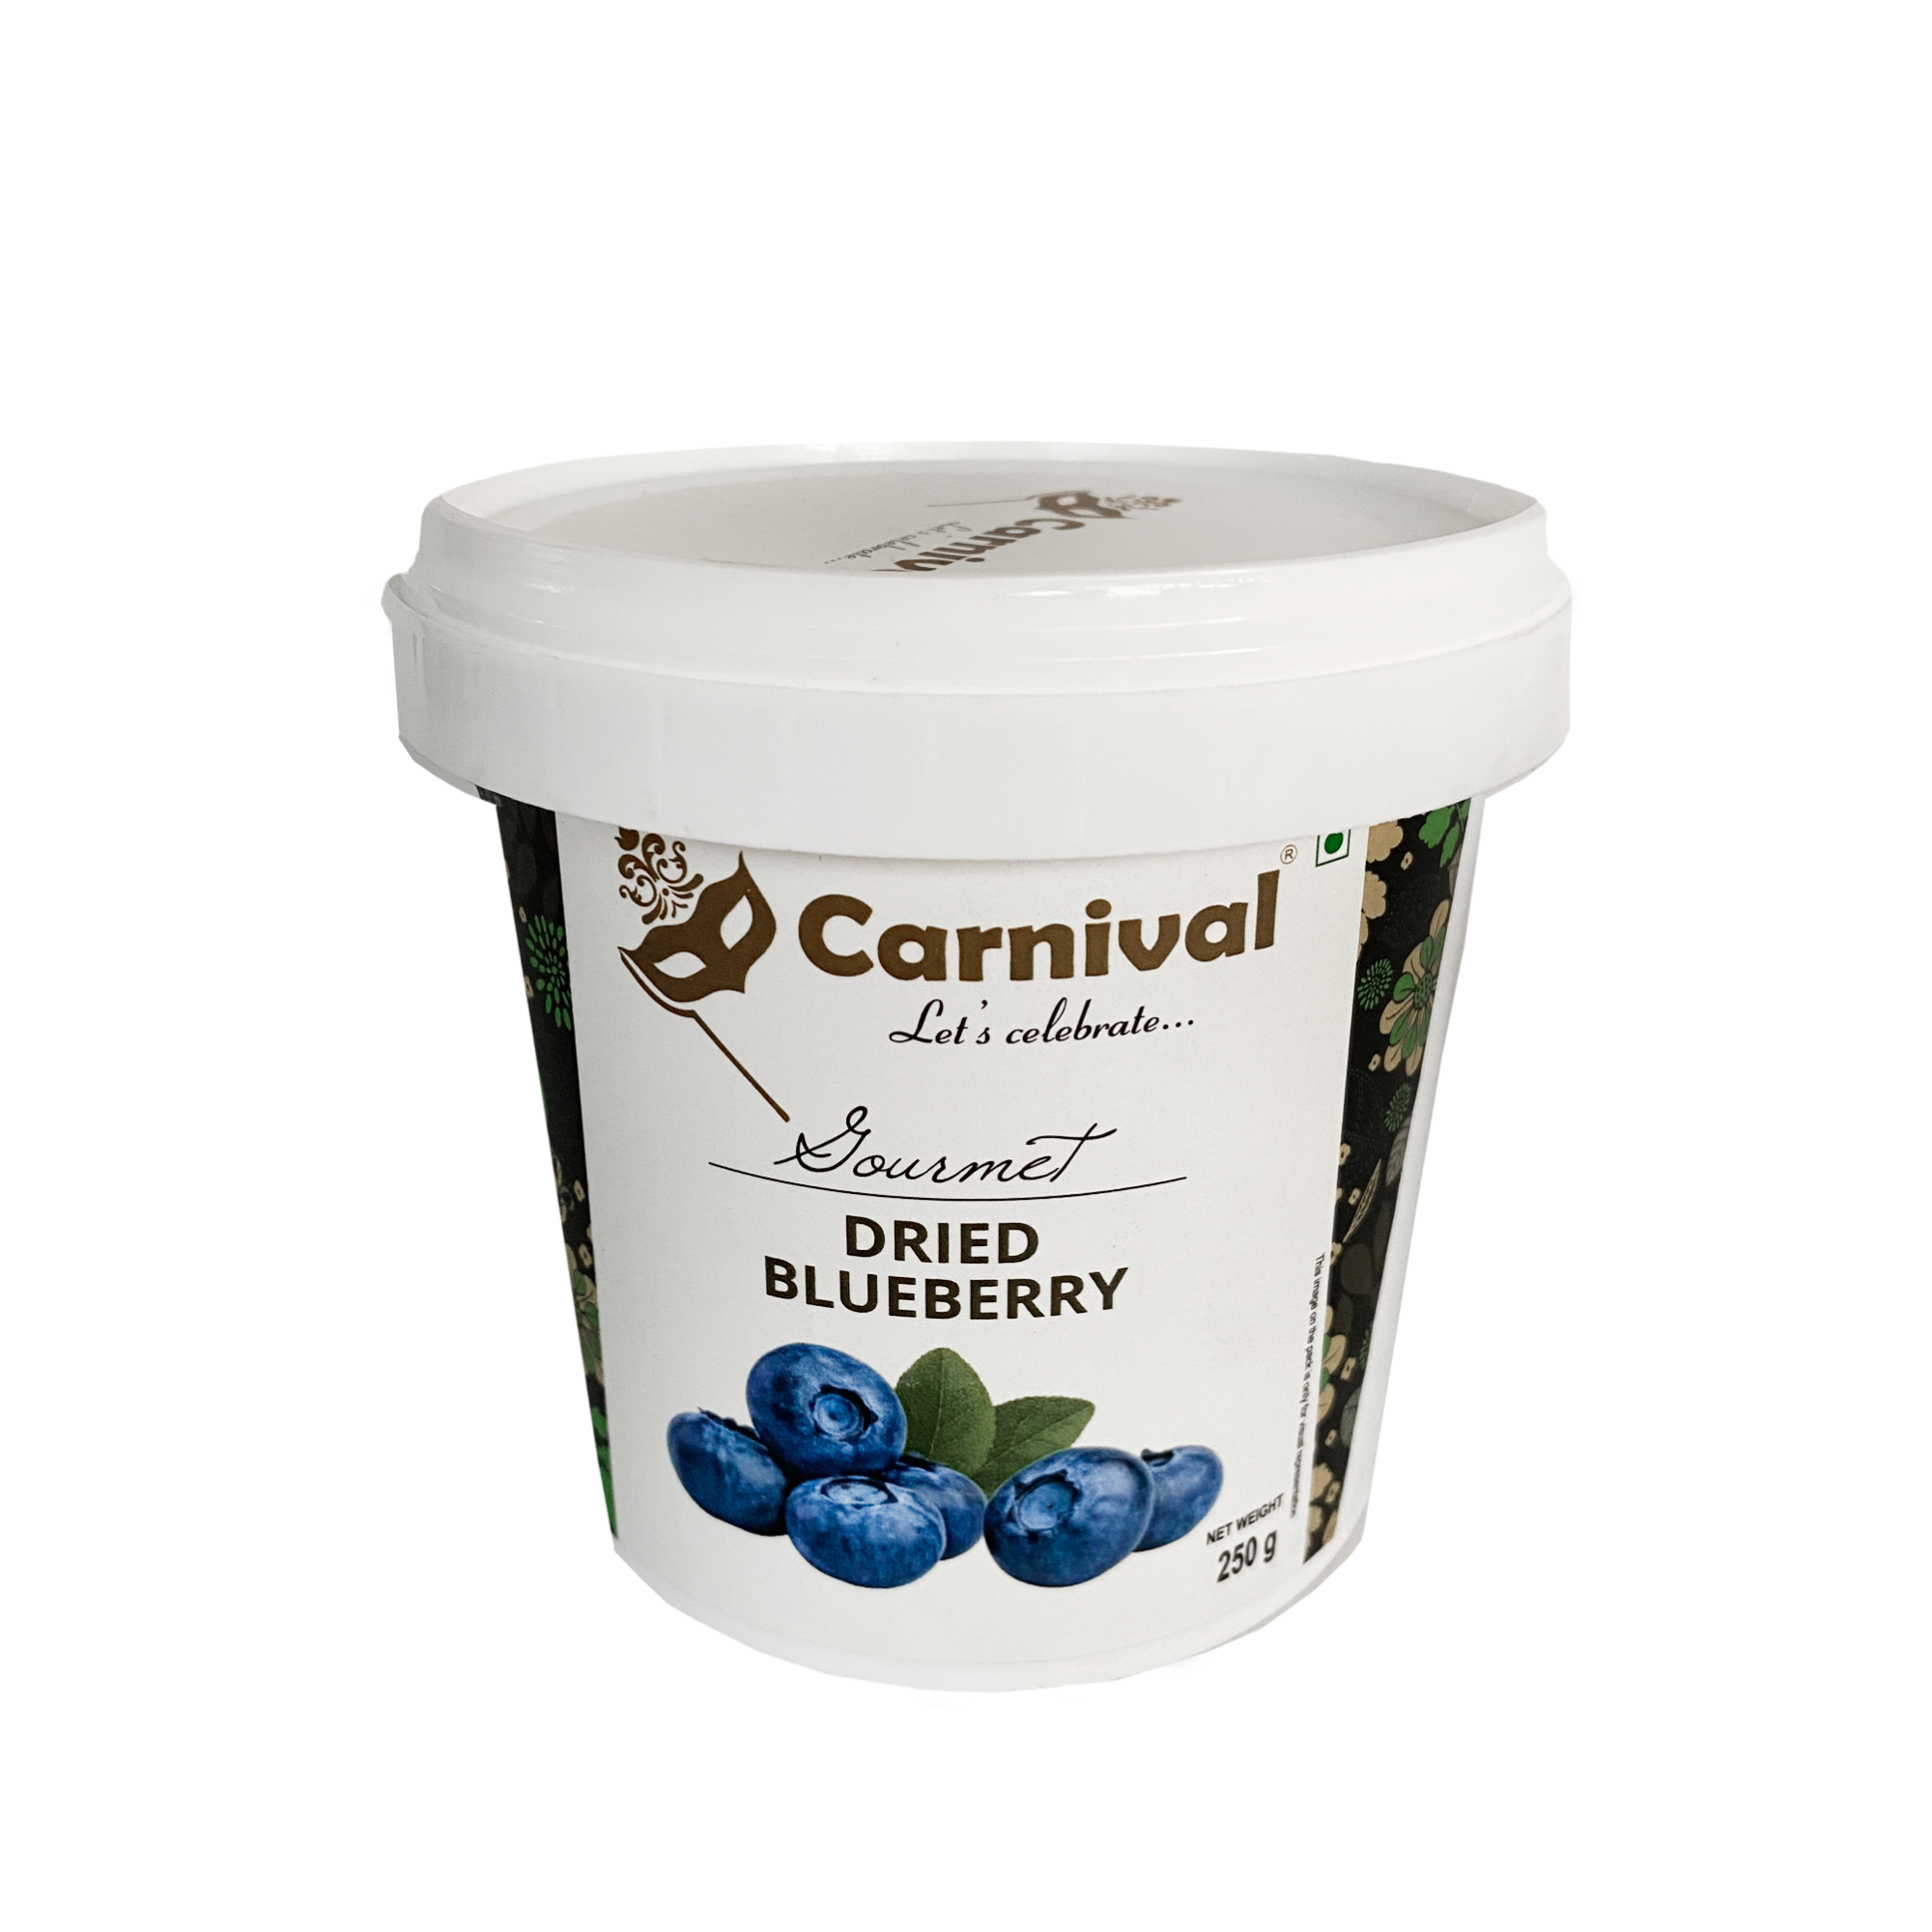 Carnival Dried Blueberry 250g - Tub